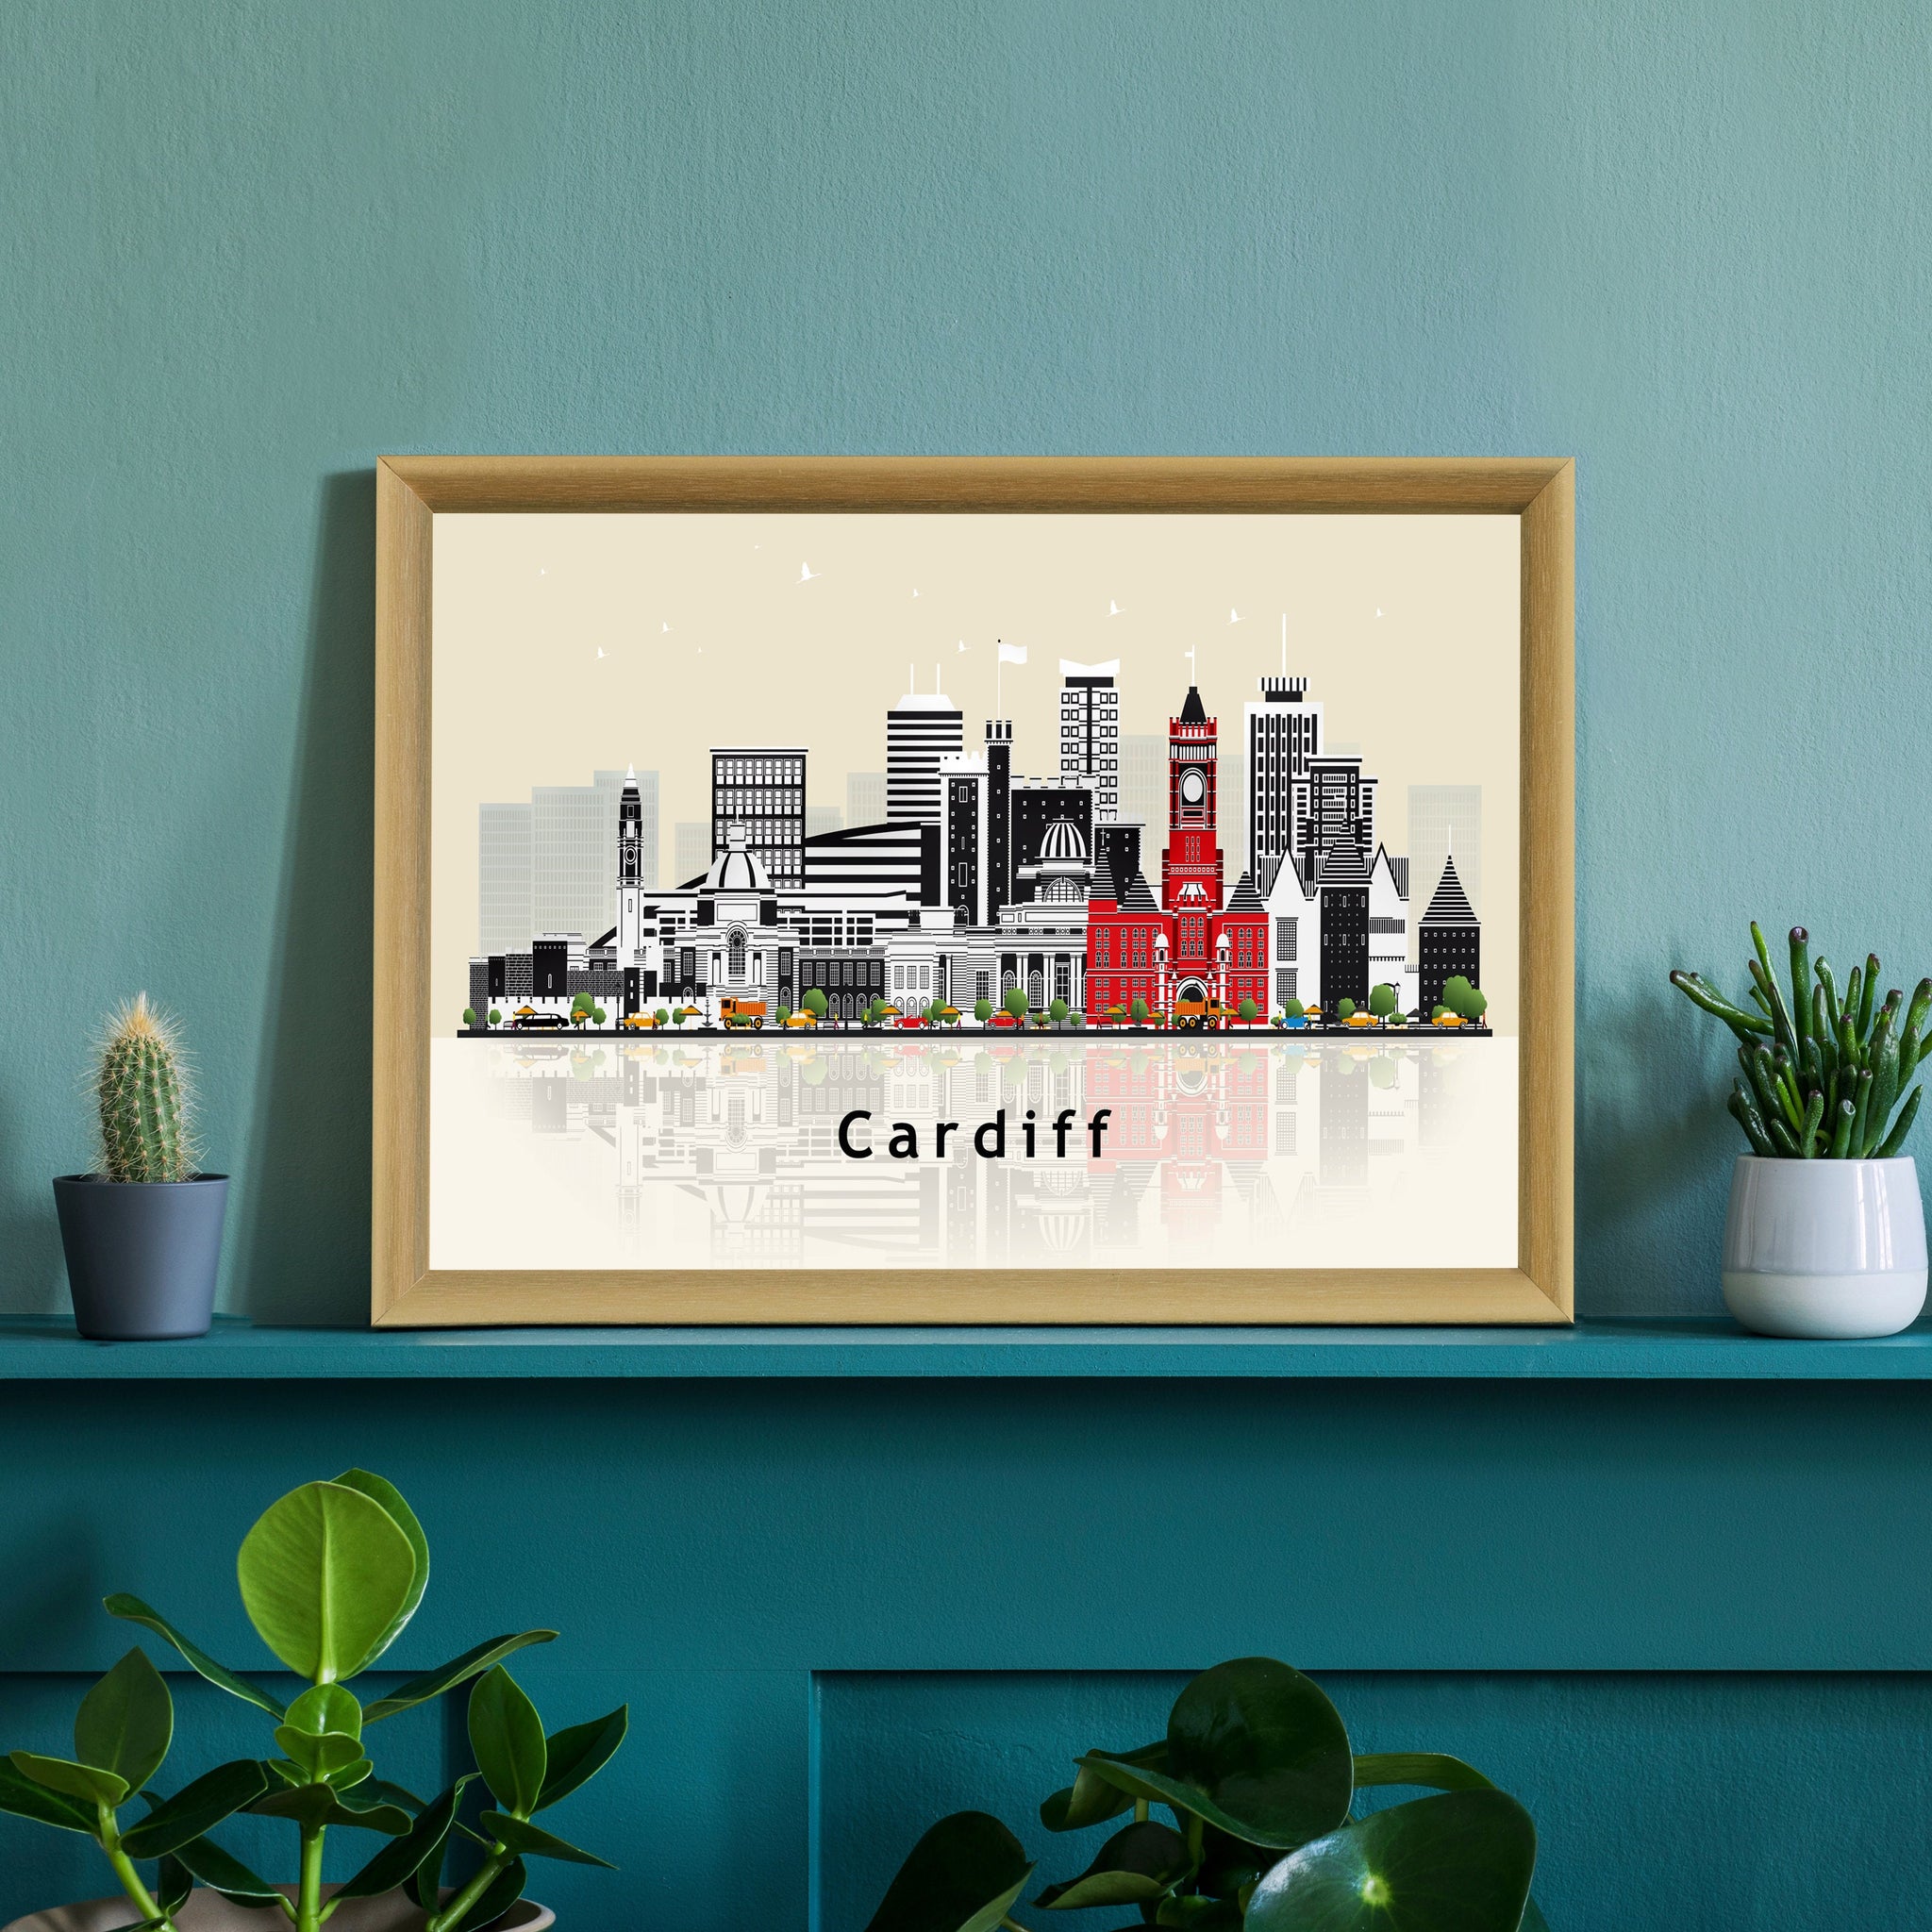 CARDIFF WALES Illustration skyline poster, Cardiff modern skyline cityscape poster print, Wales landmark map poster, Home wall decoration